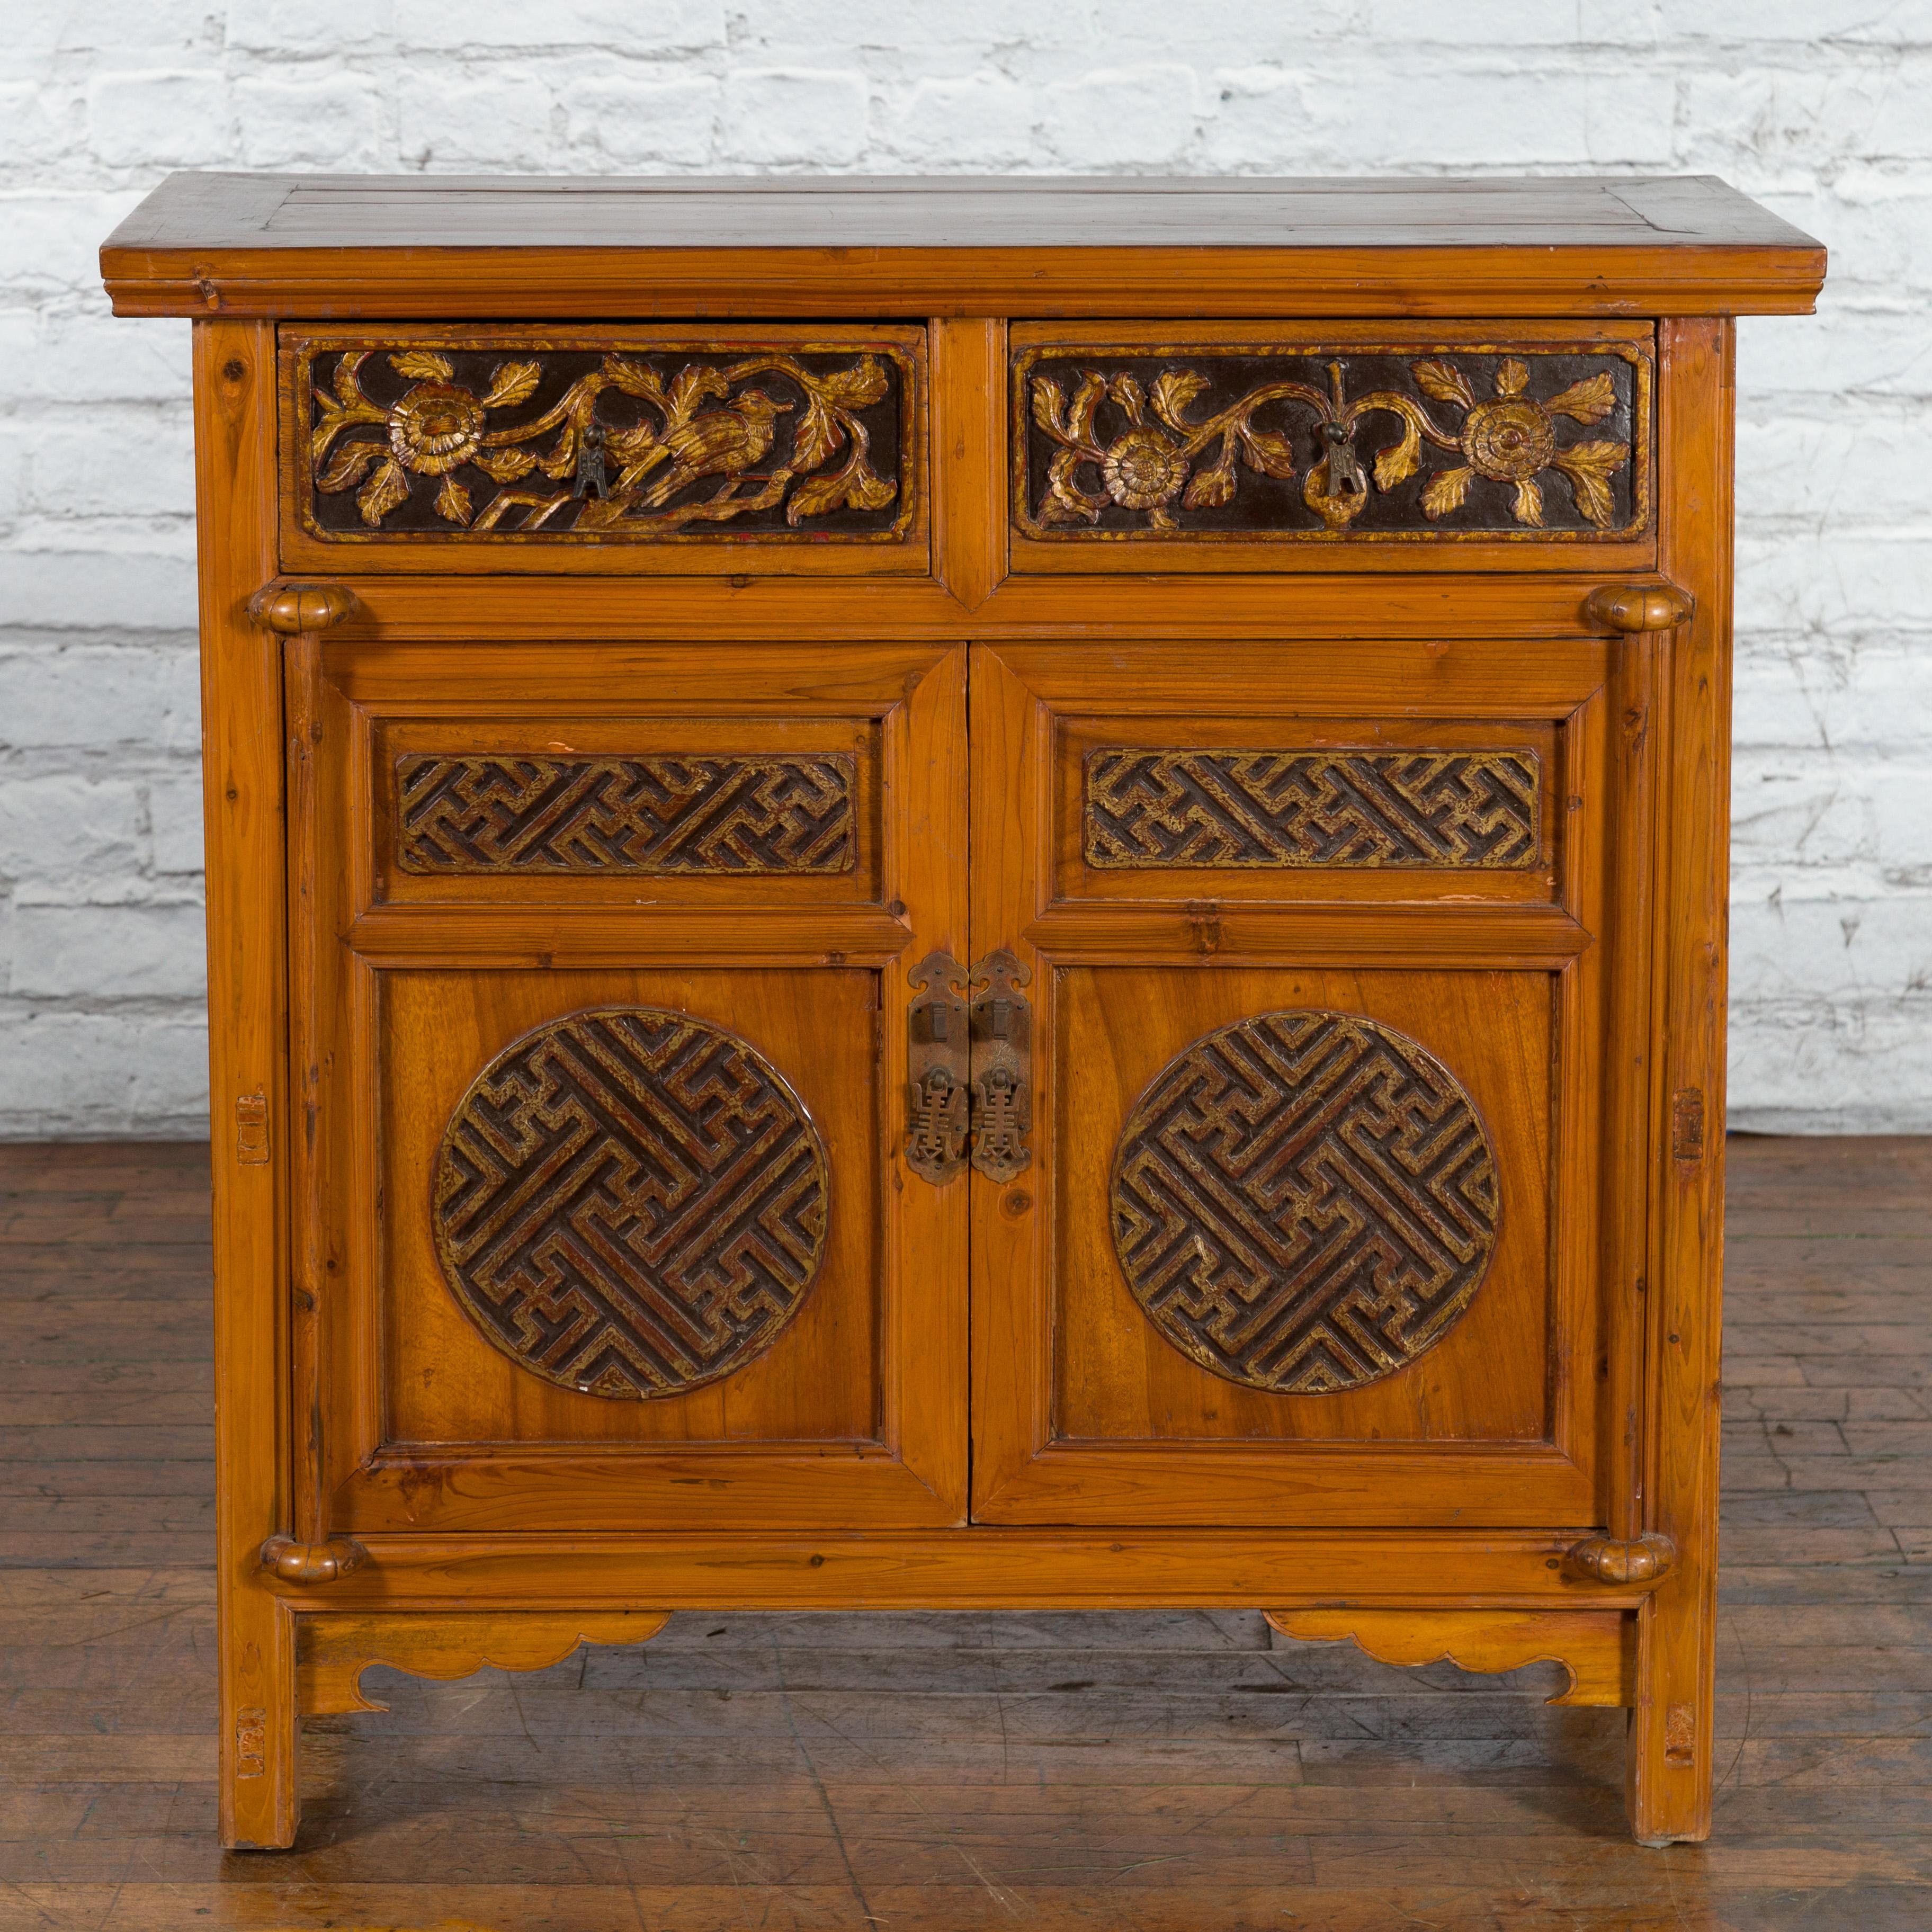 A Chinese Qing Dynasty period side cabinet from the 19th century with carved drawers, gilt accents, fretwork motifs and brass hardware. Created in China during the Qing Dynasty period in the 19th century, this side cabinet features a rectangular top